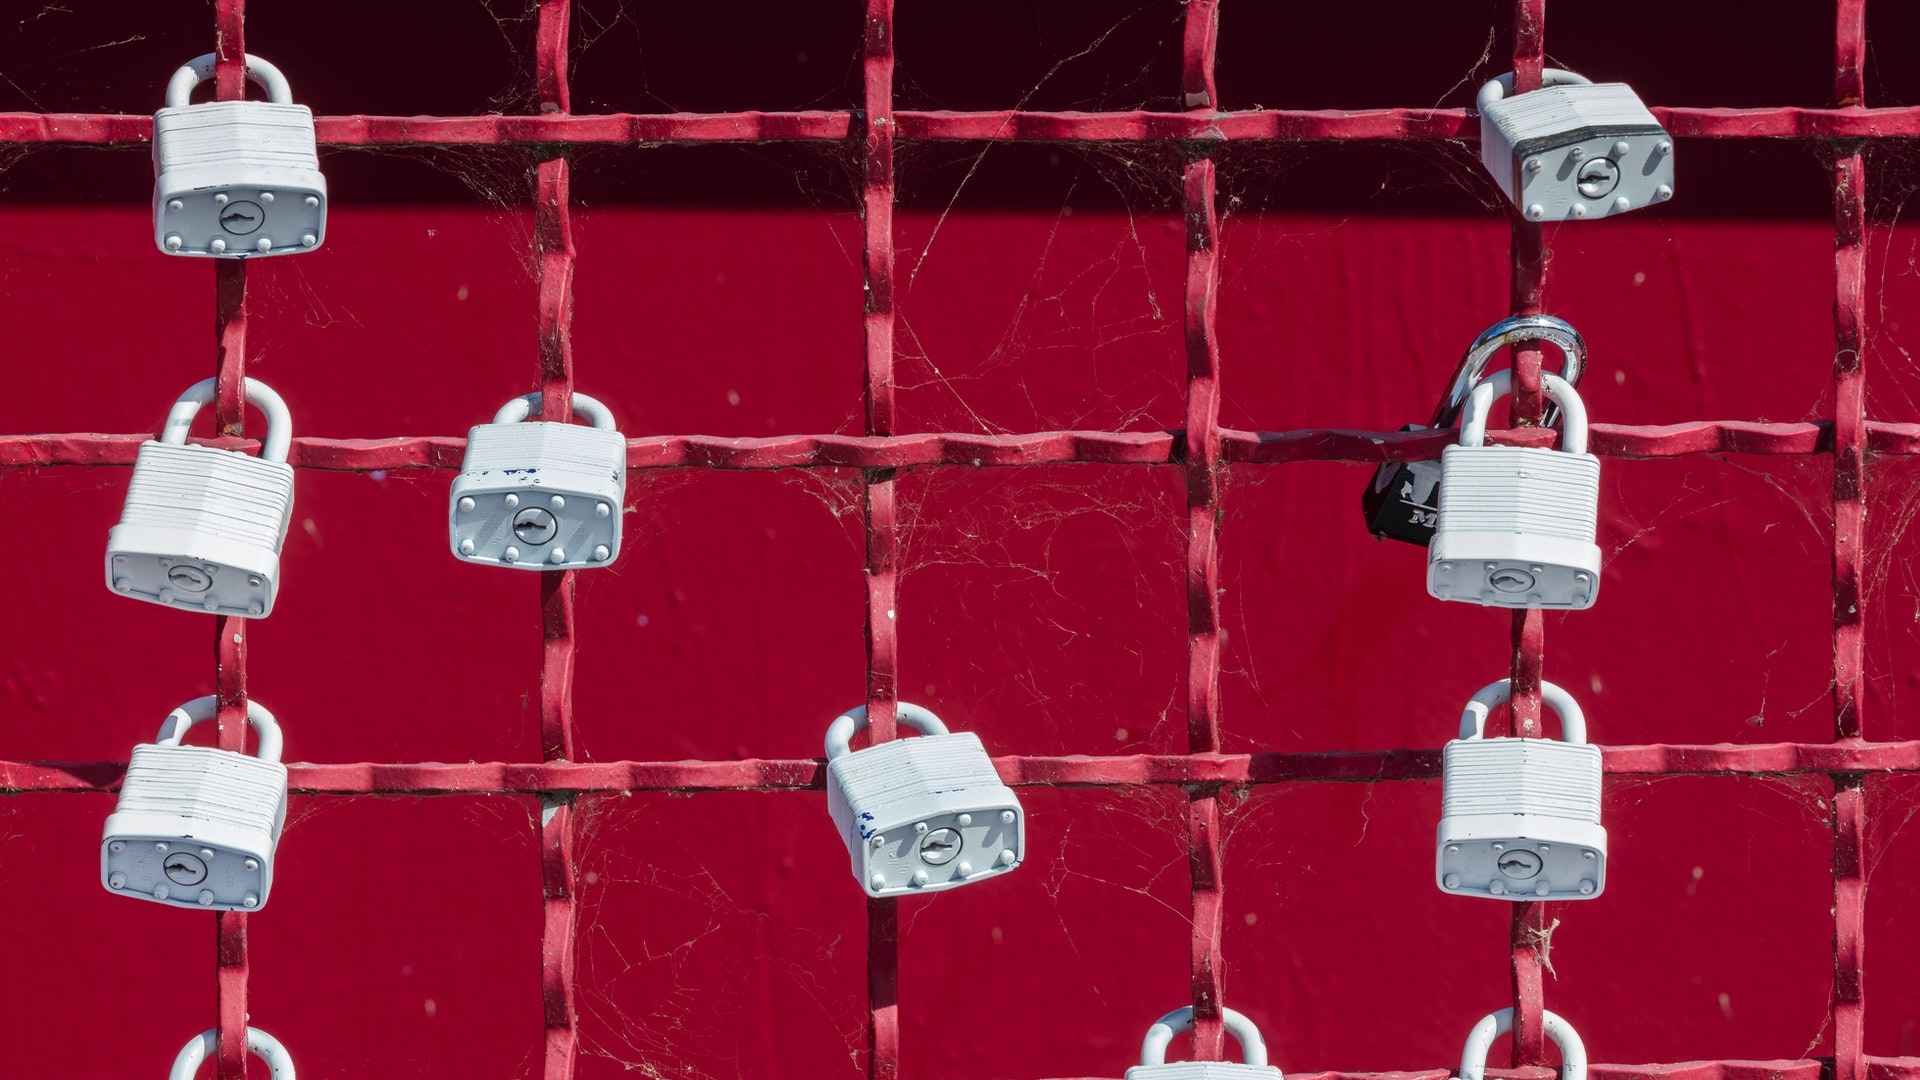 Grey padlocks affixed to a red metal grid fence